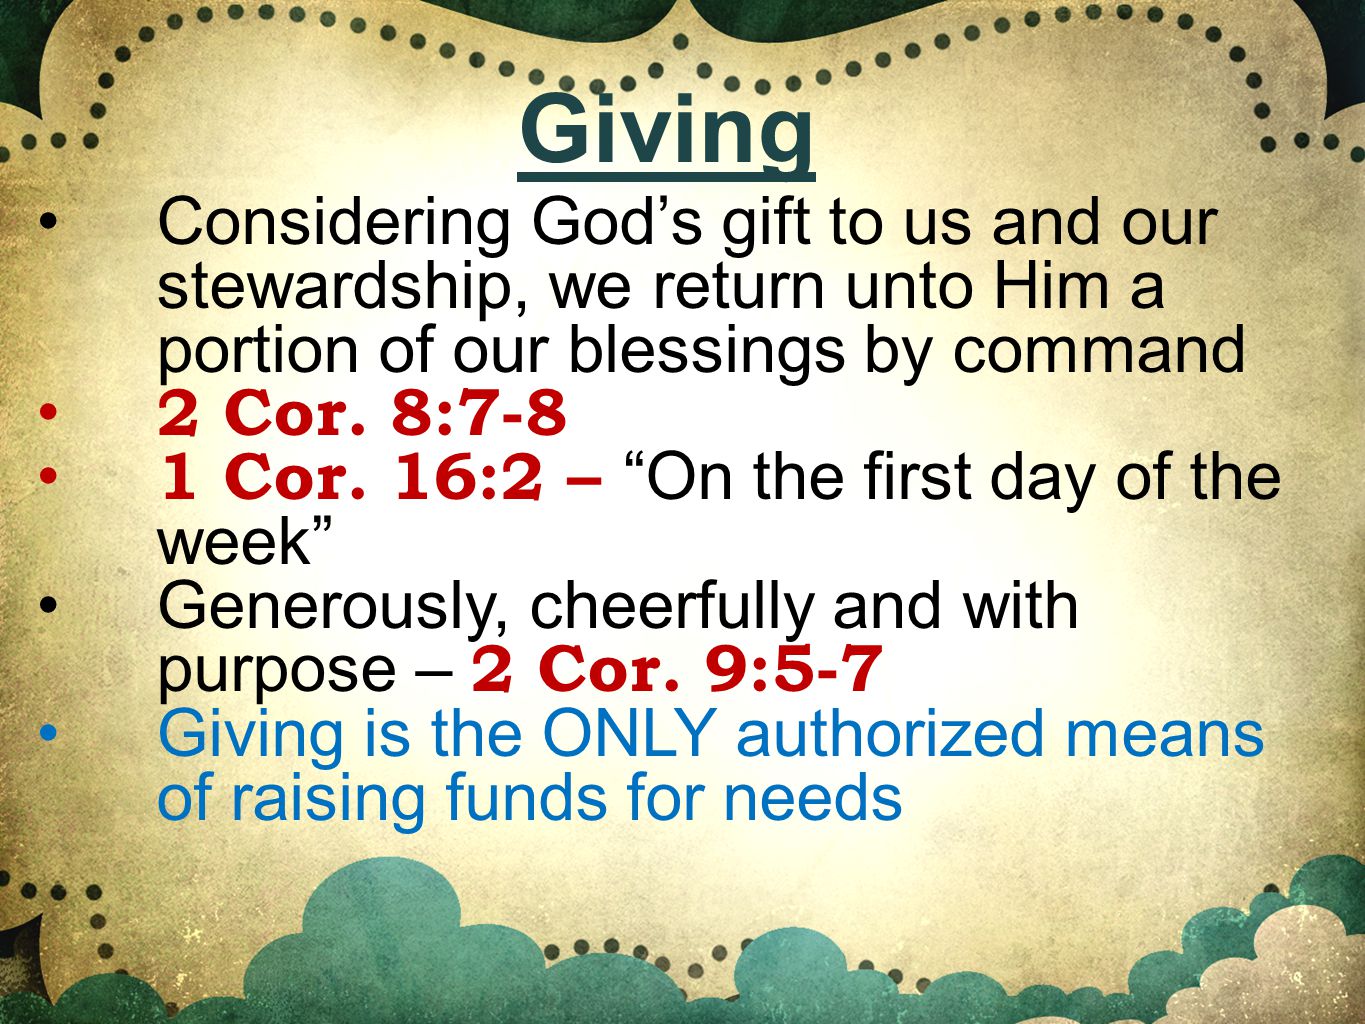 Considering God’s gift to us and our stewardship, we return unto Him a portion of our blessings by command 2 Cor.